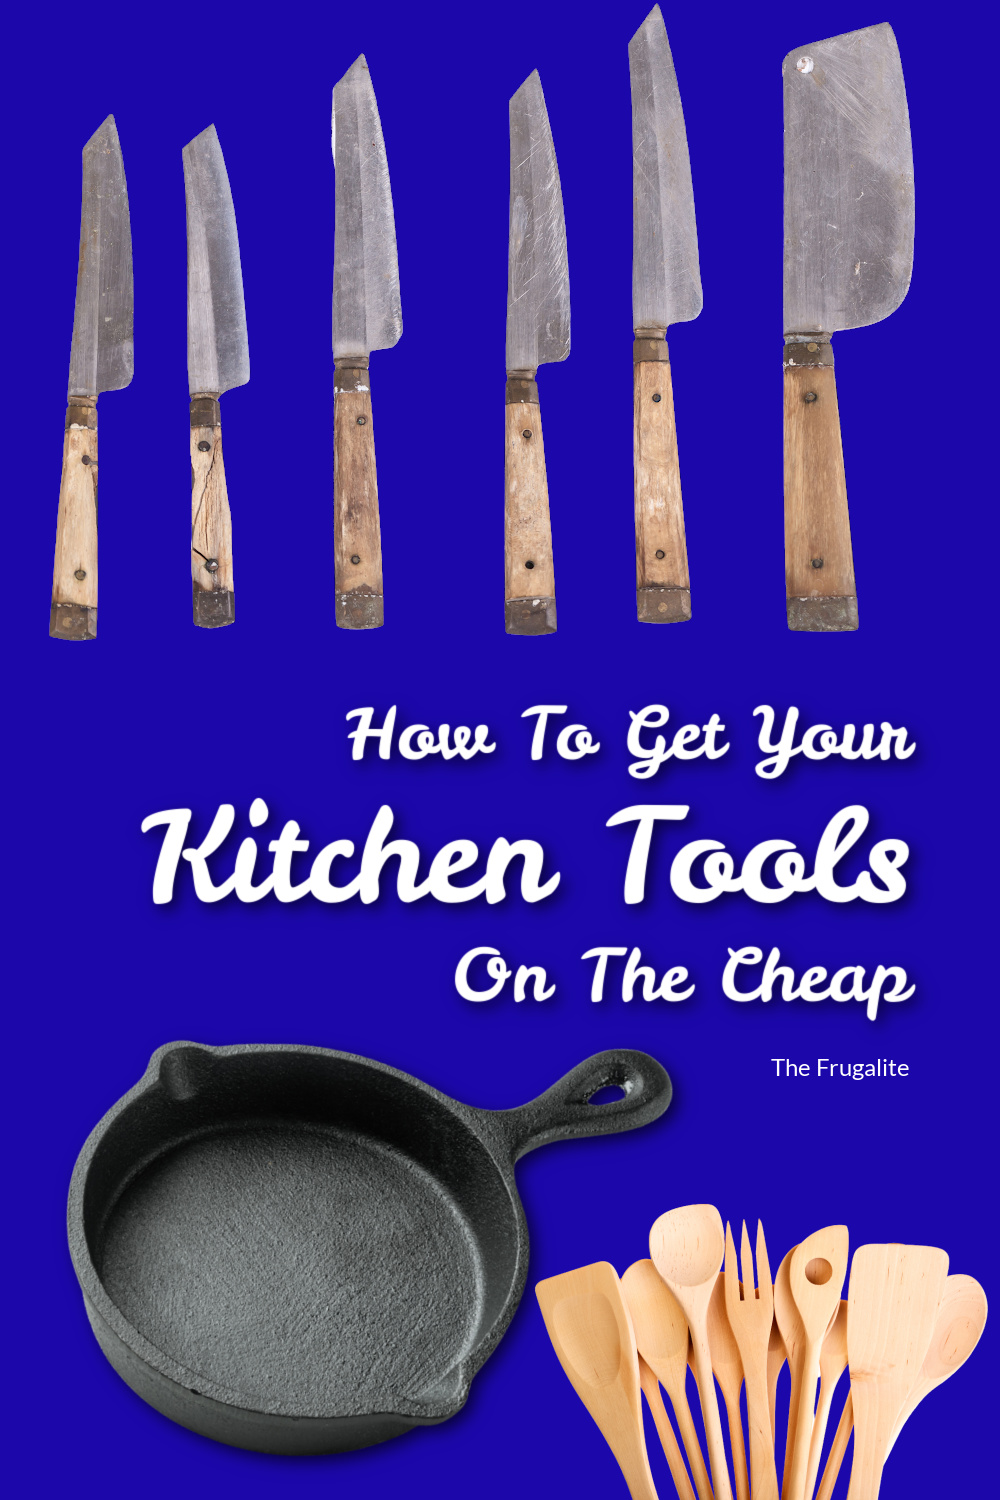 How To Get Your Kitchen Tools On The Cheap